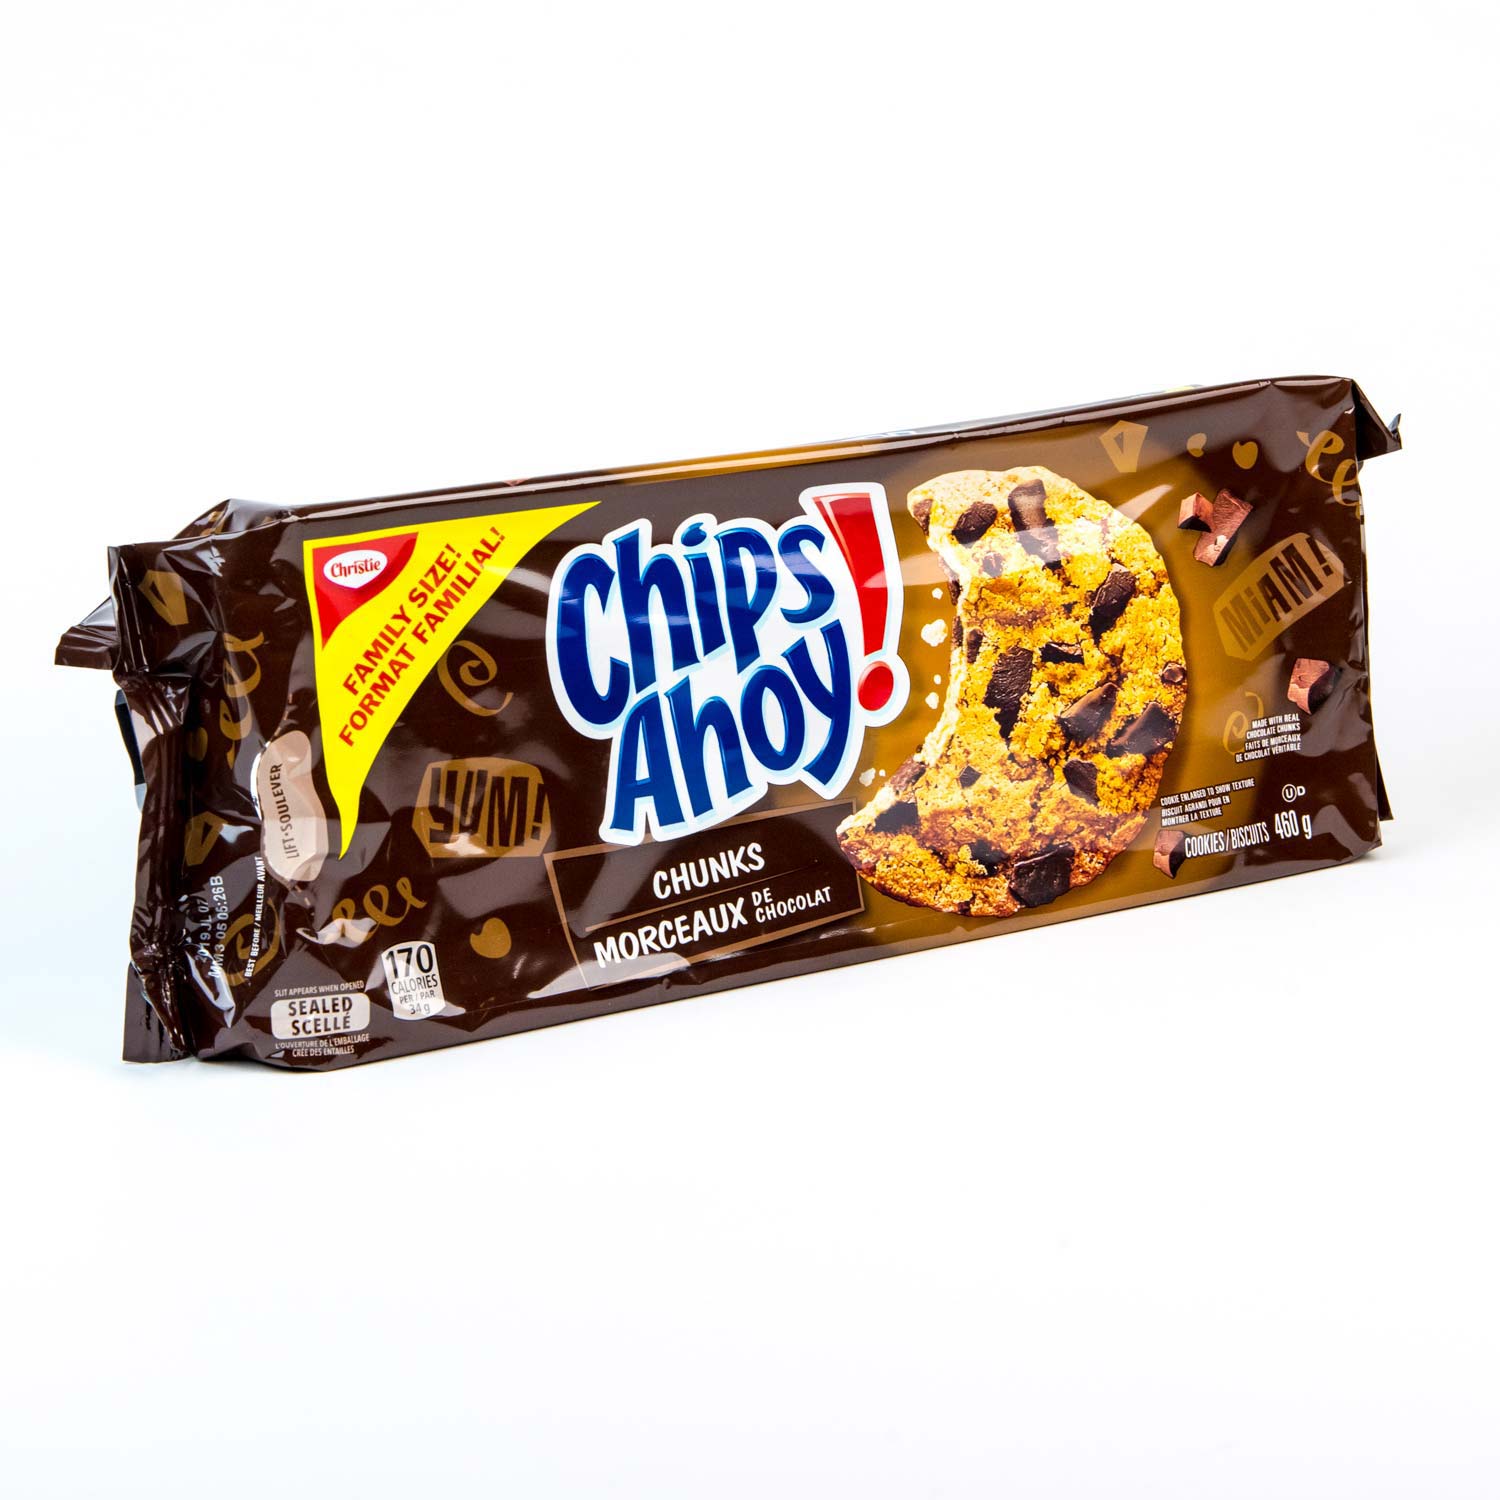 Ahoy chips Snack Nut